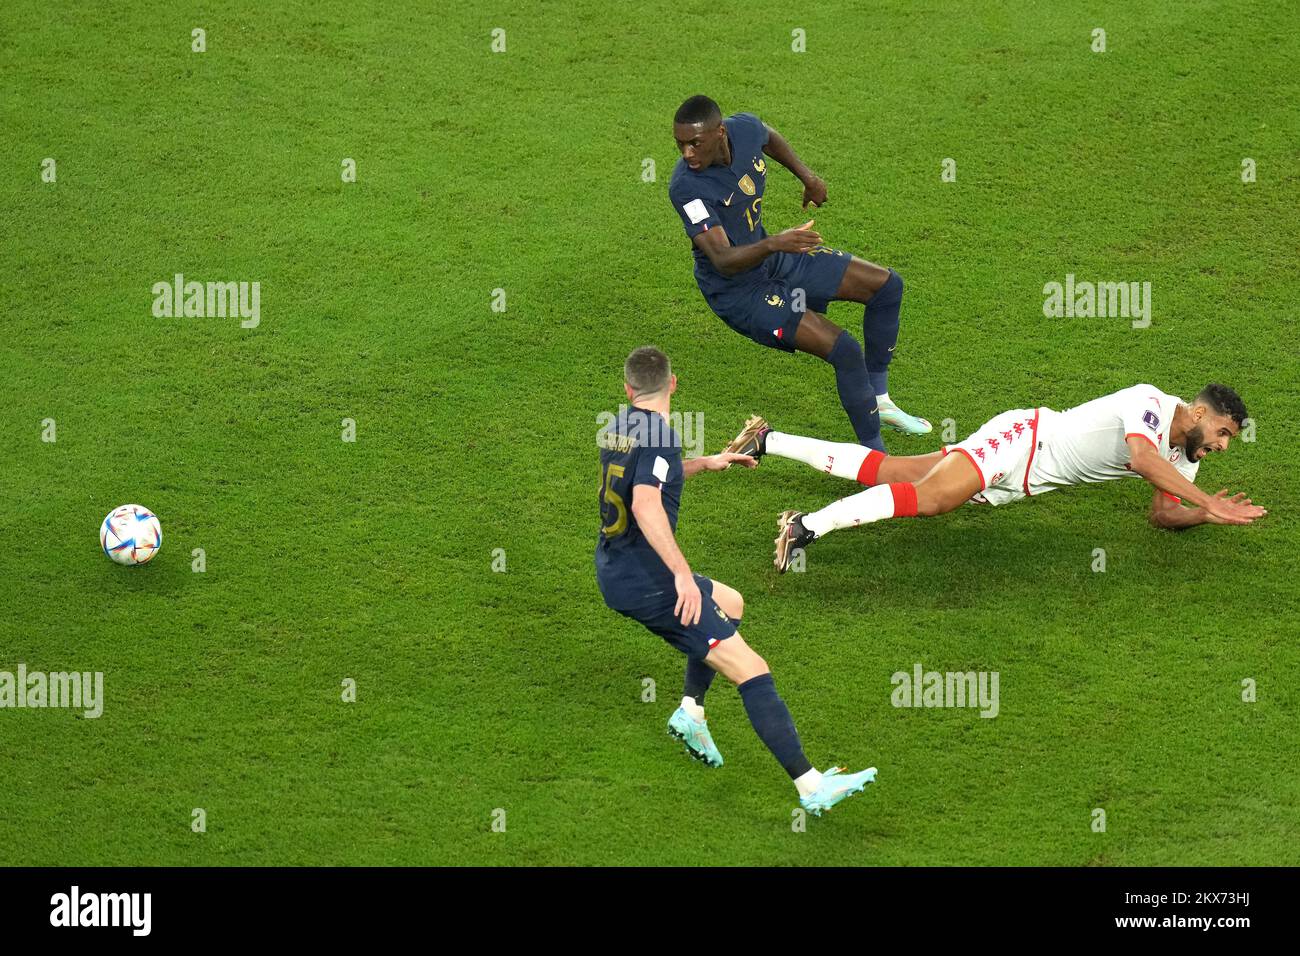 Tunisia's Anis Ben Slimane on the touchline battles for the ball with France's Randal Kolo Muani and Jordan Veretout (bottom) during the FIFA World Cup Group D match at the Education City Stadium in Al Rayyan, Qatar. Picture date: Wednesday November 30, 2022. Stock Photo